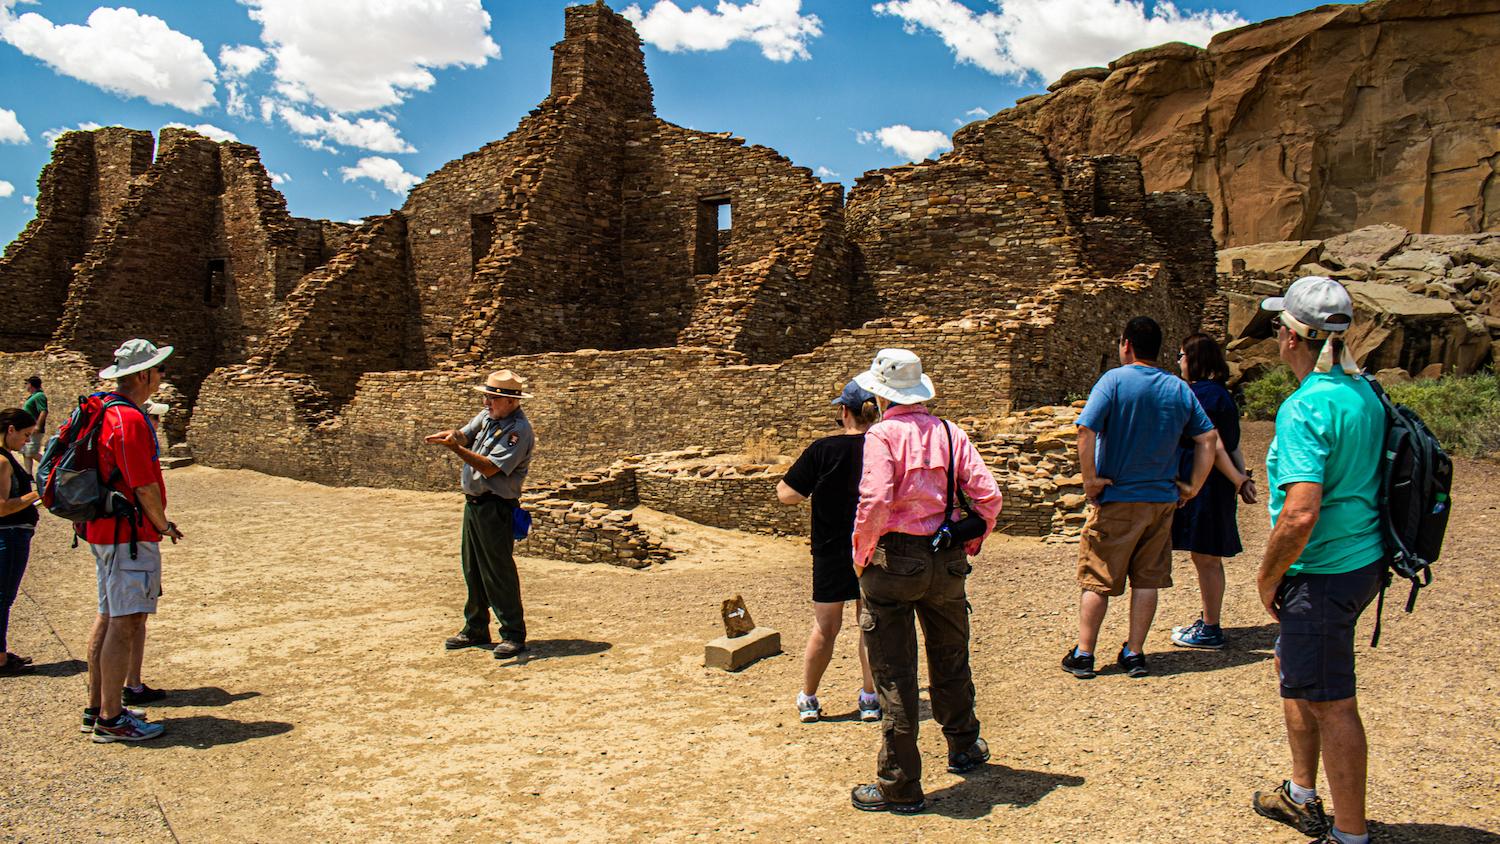 One of the few national parks where visitors can wander through pueblos at their own paces, taking in a ranger-led tour of a village provides a full story and a chance to ask questions at Chaco Culture National Historical Park, between Crownpoint and Nage